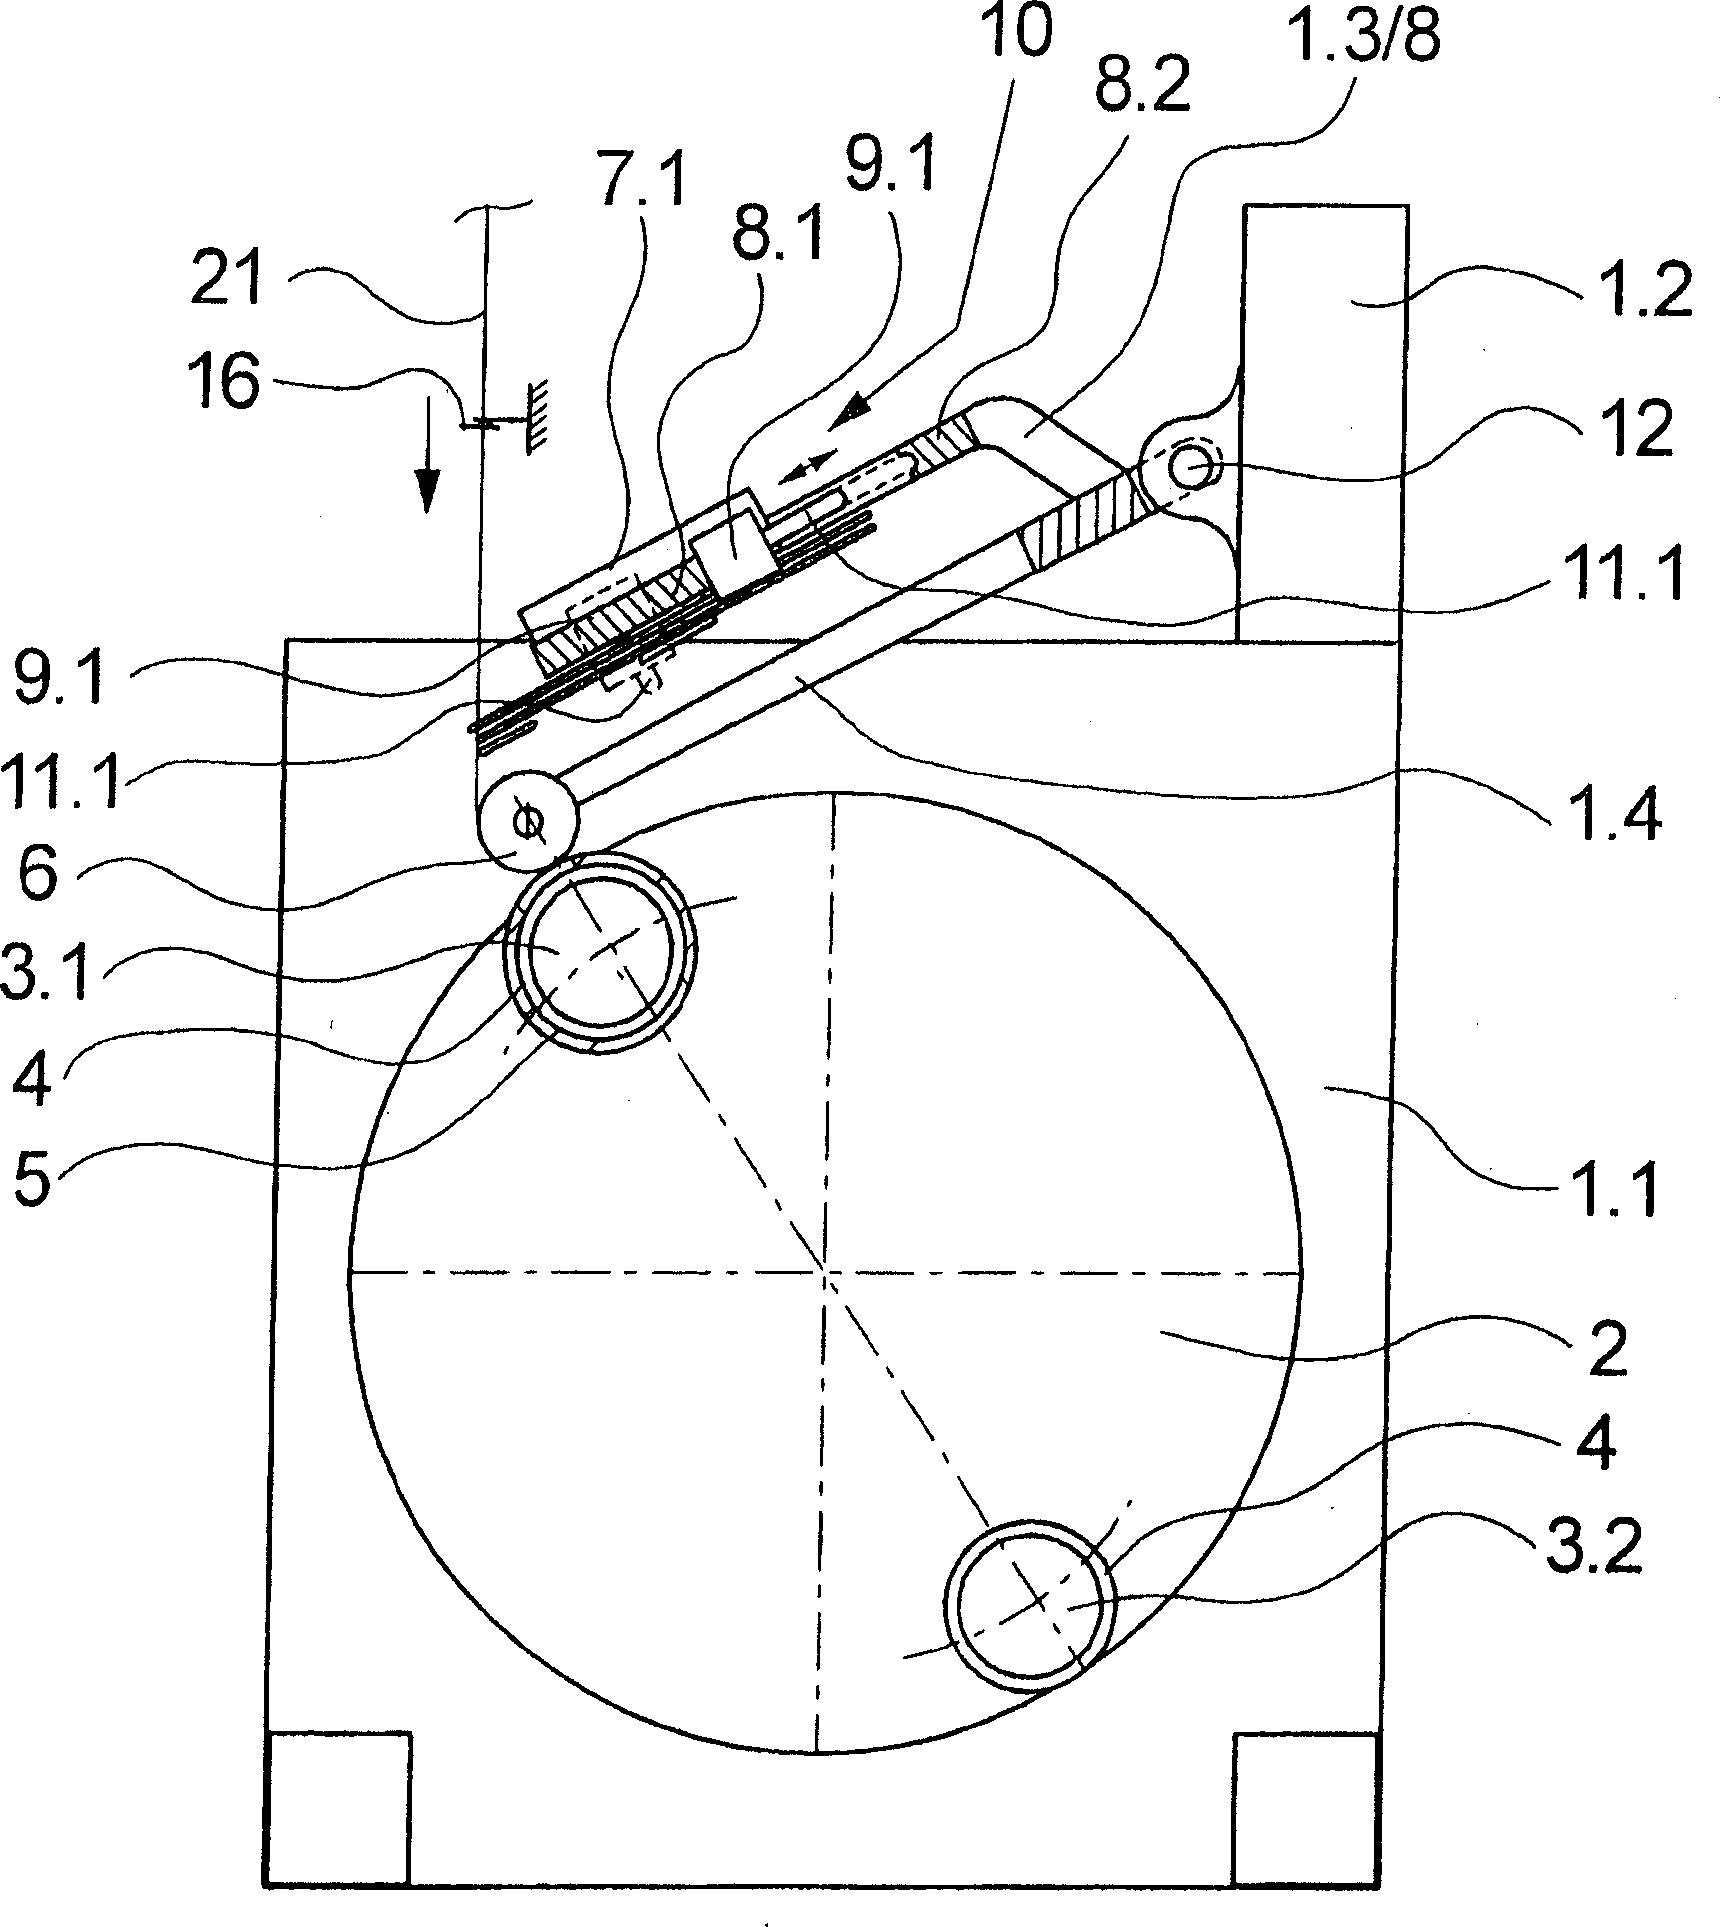 Device and method for winding multi-strand multifilament bundle